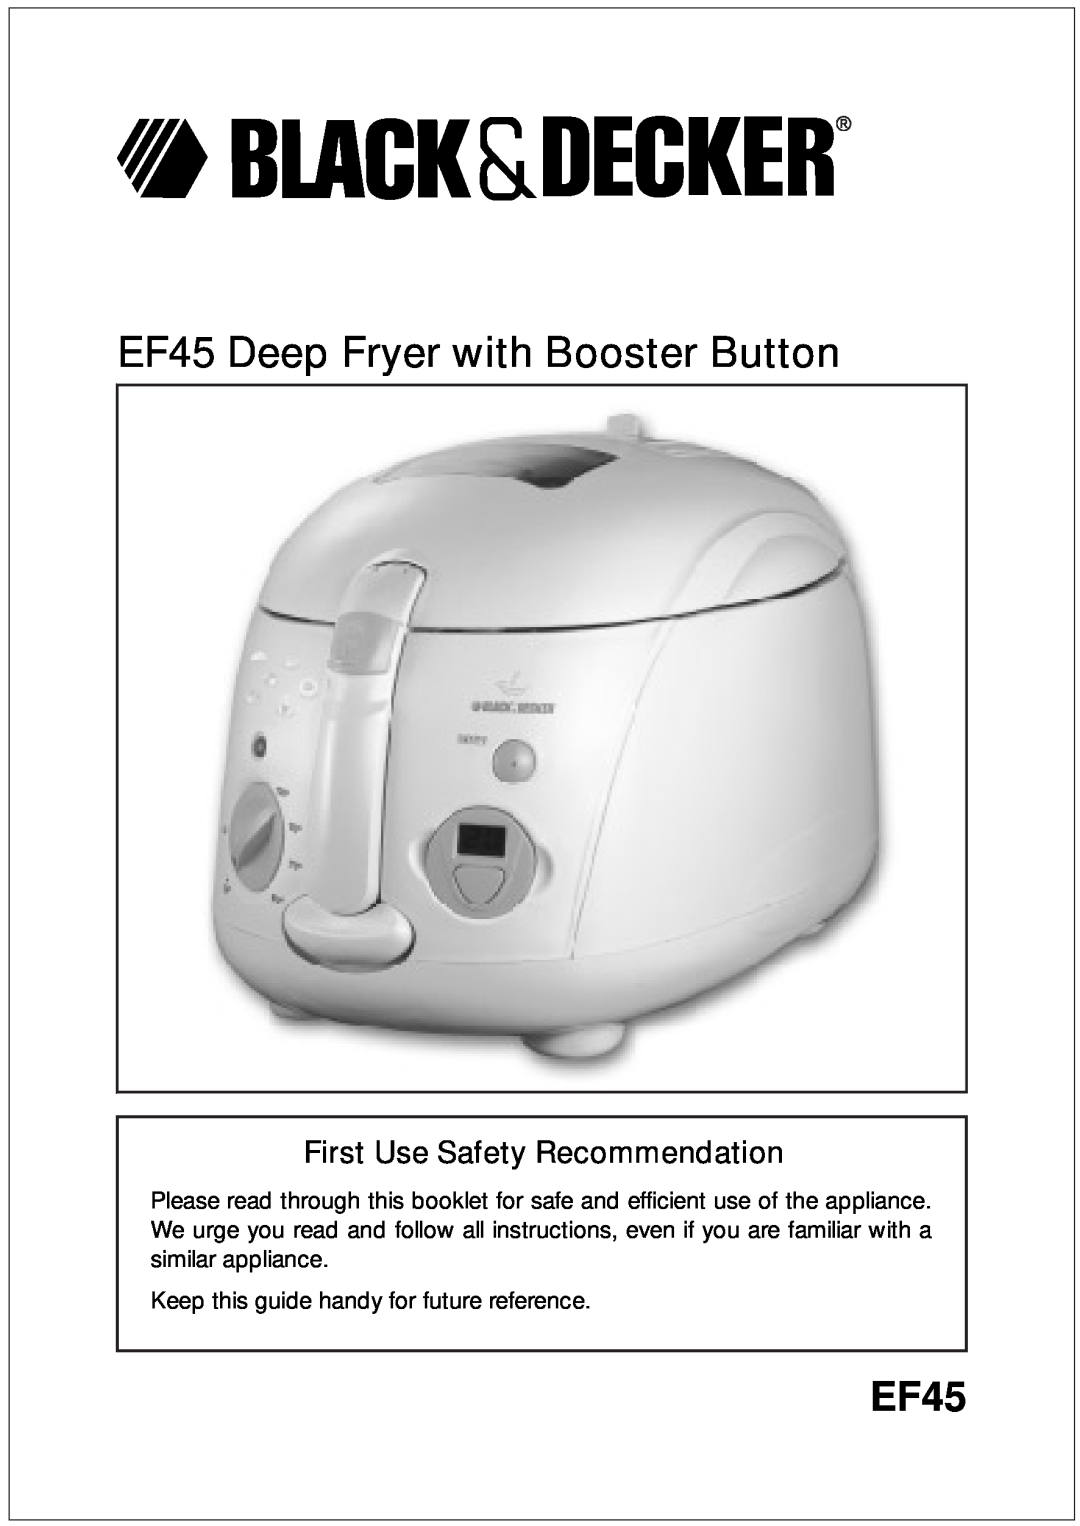 Black & Decker manual Keep this guide handy for future reference, EF45 Deep Fryer with Booster Button 